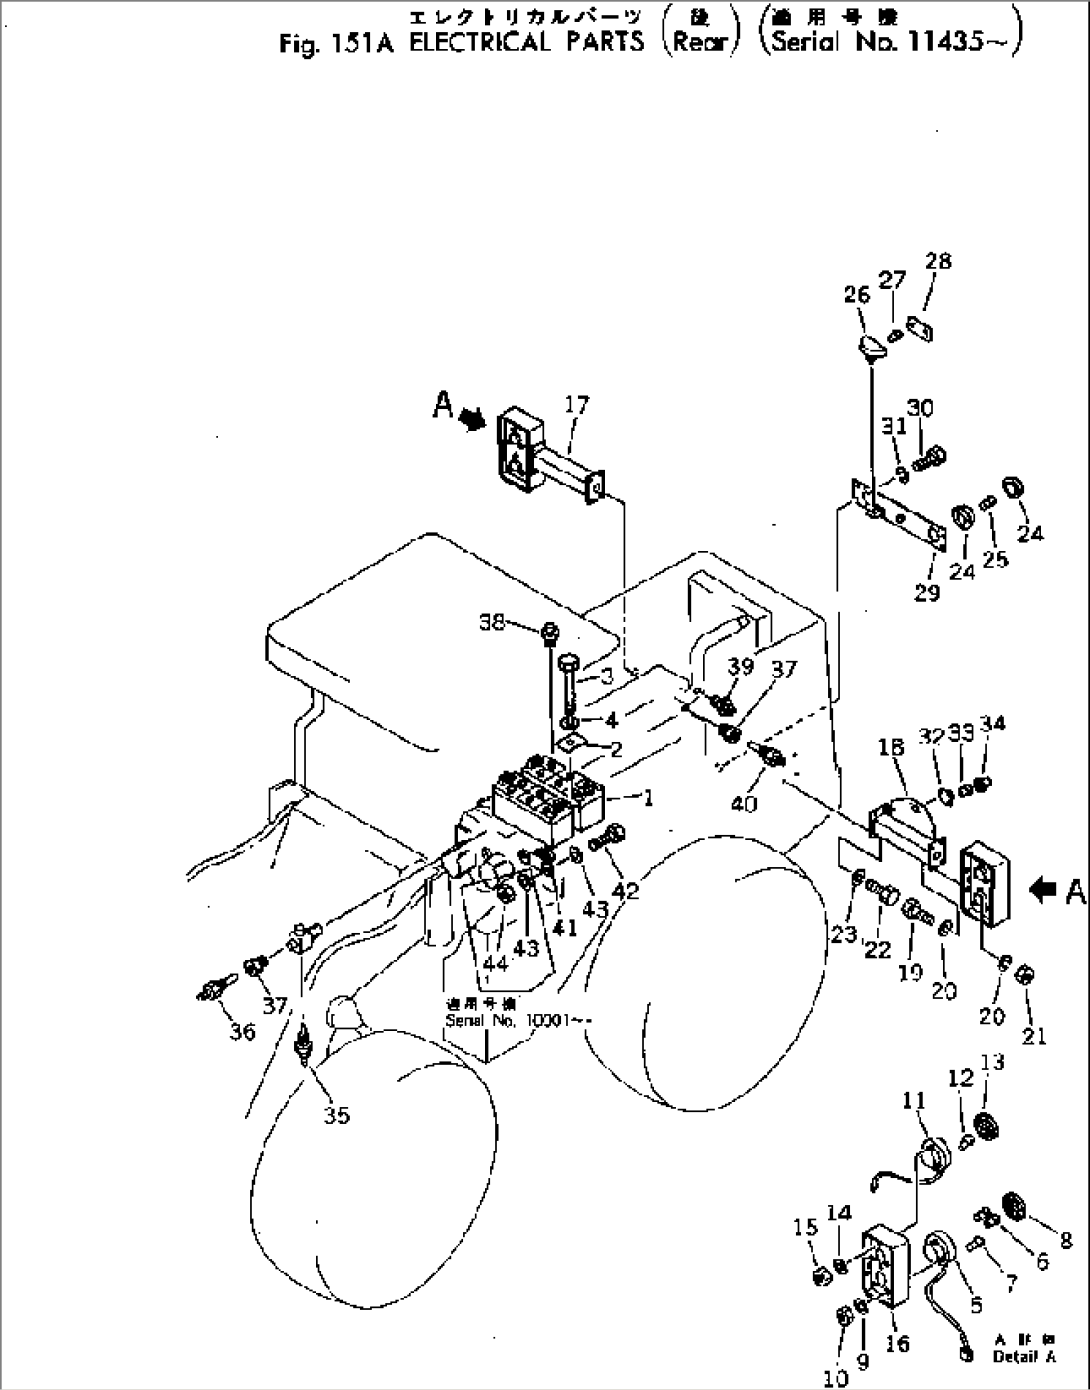 ELECTRICAL PARTS (REAR)(#11435-)